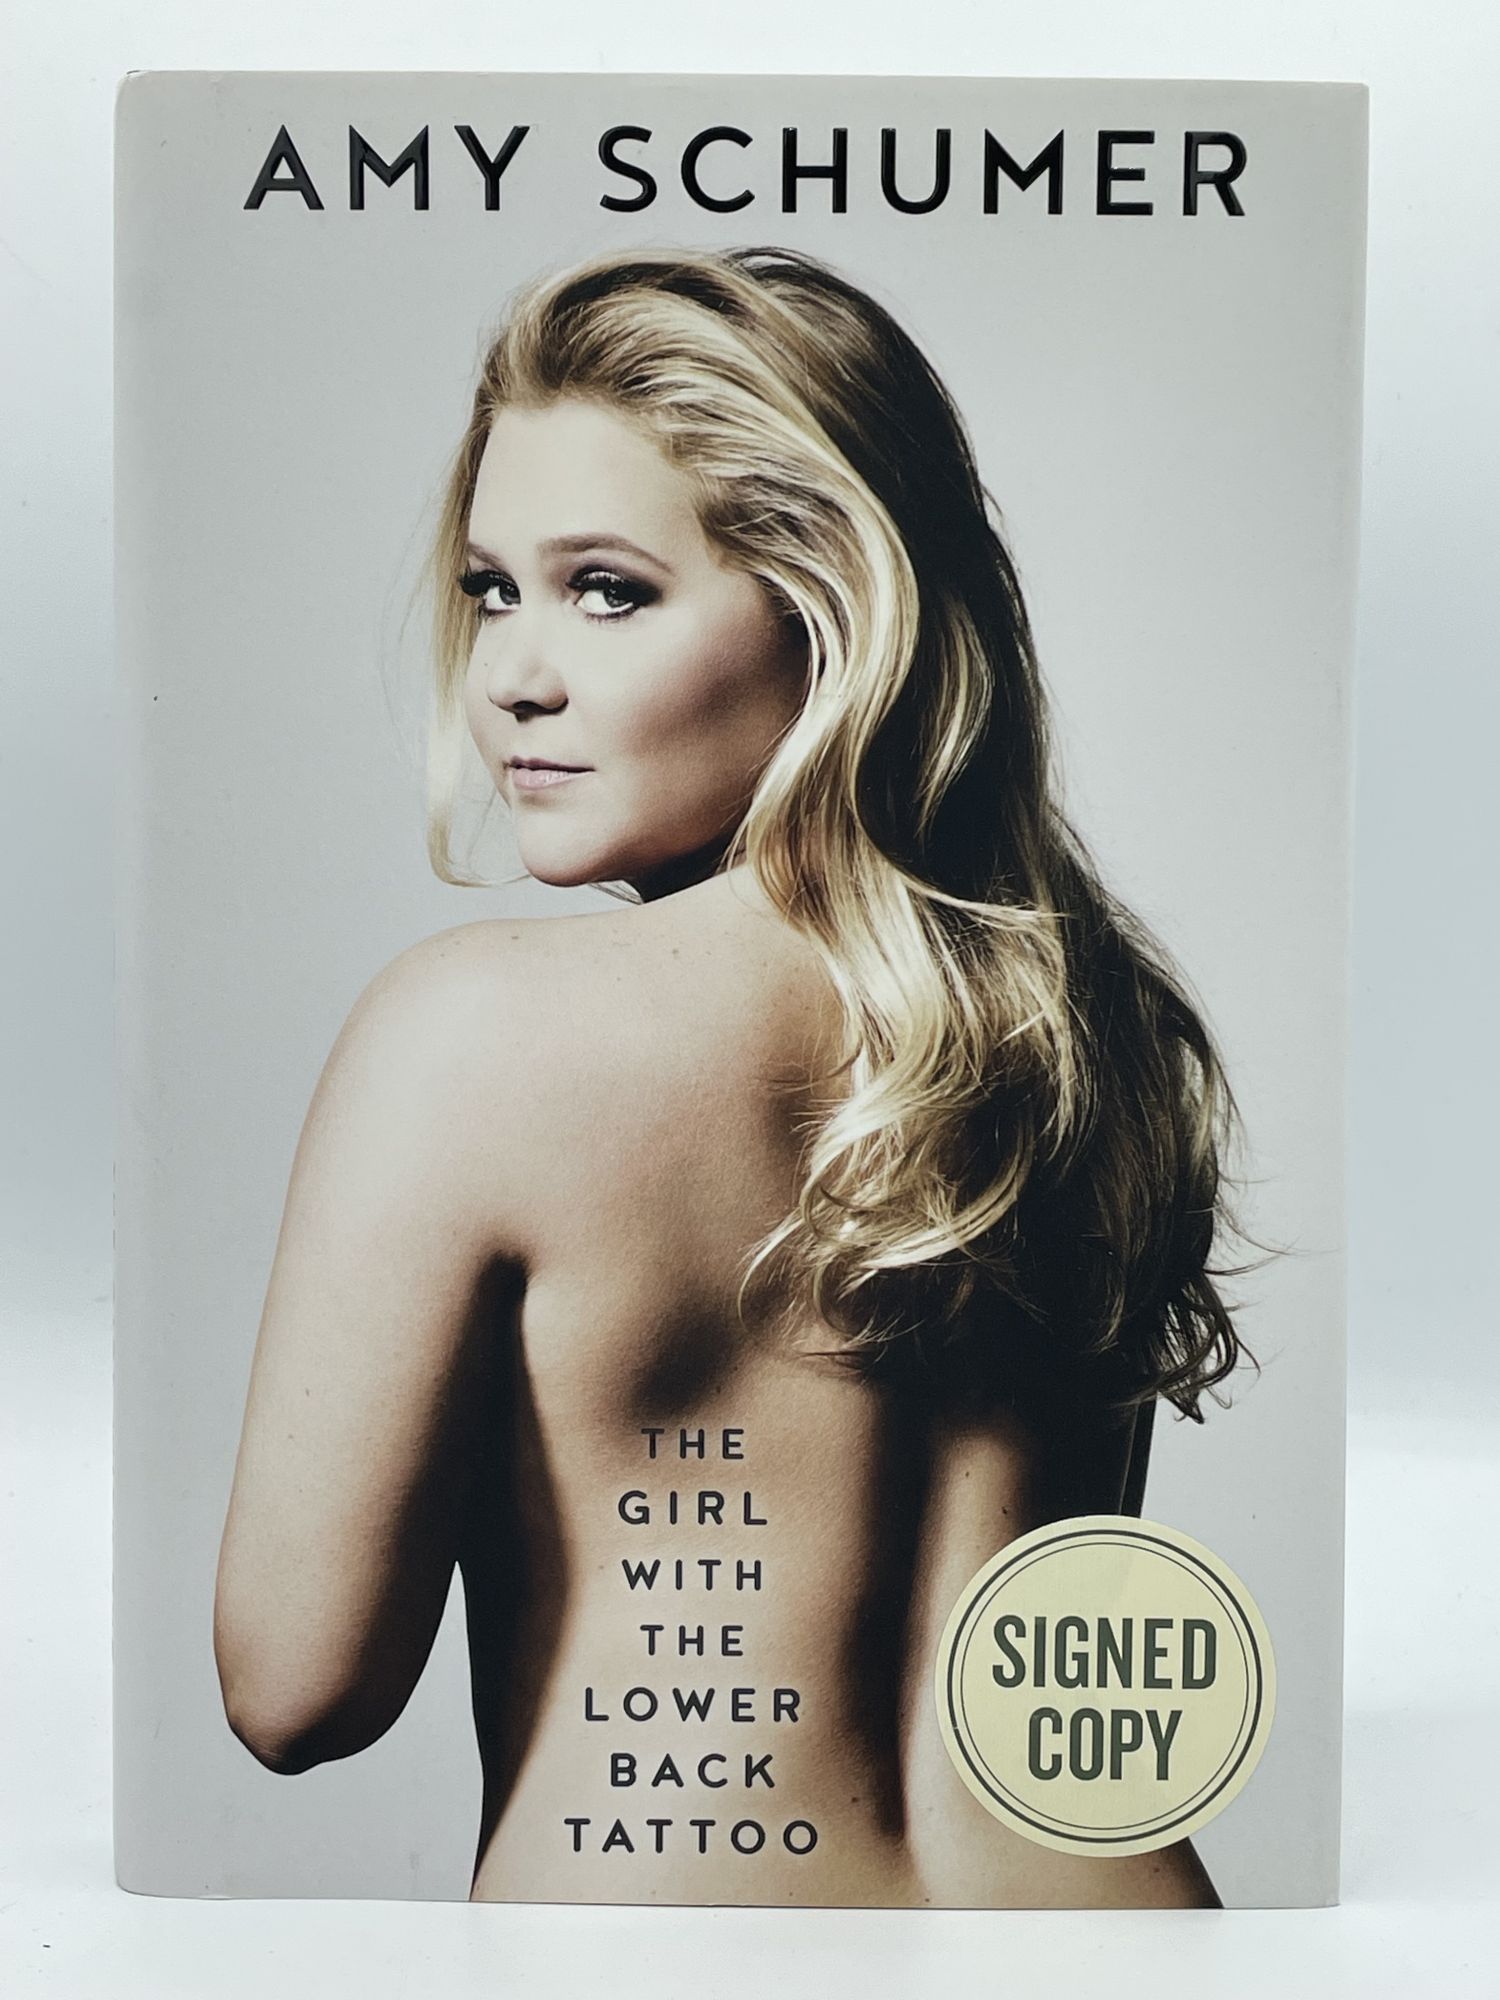 The Girl with the Lower Back Tattoo SCHUMER, Amy [SIGNED] [Very Good] [Hardcover] 8vo. Boards. Dust jacket. 323 pp. Minor jacket wear. Signed on publisher's tipped-in page. Autograph sticker on front jacket cover. This is a signed first edition memoir by the comedian Schumer.